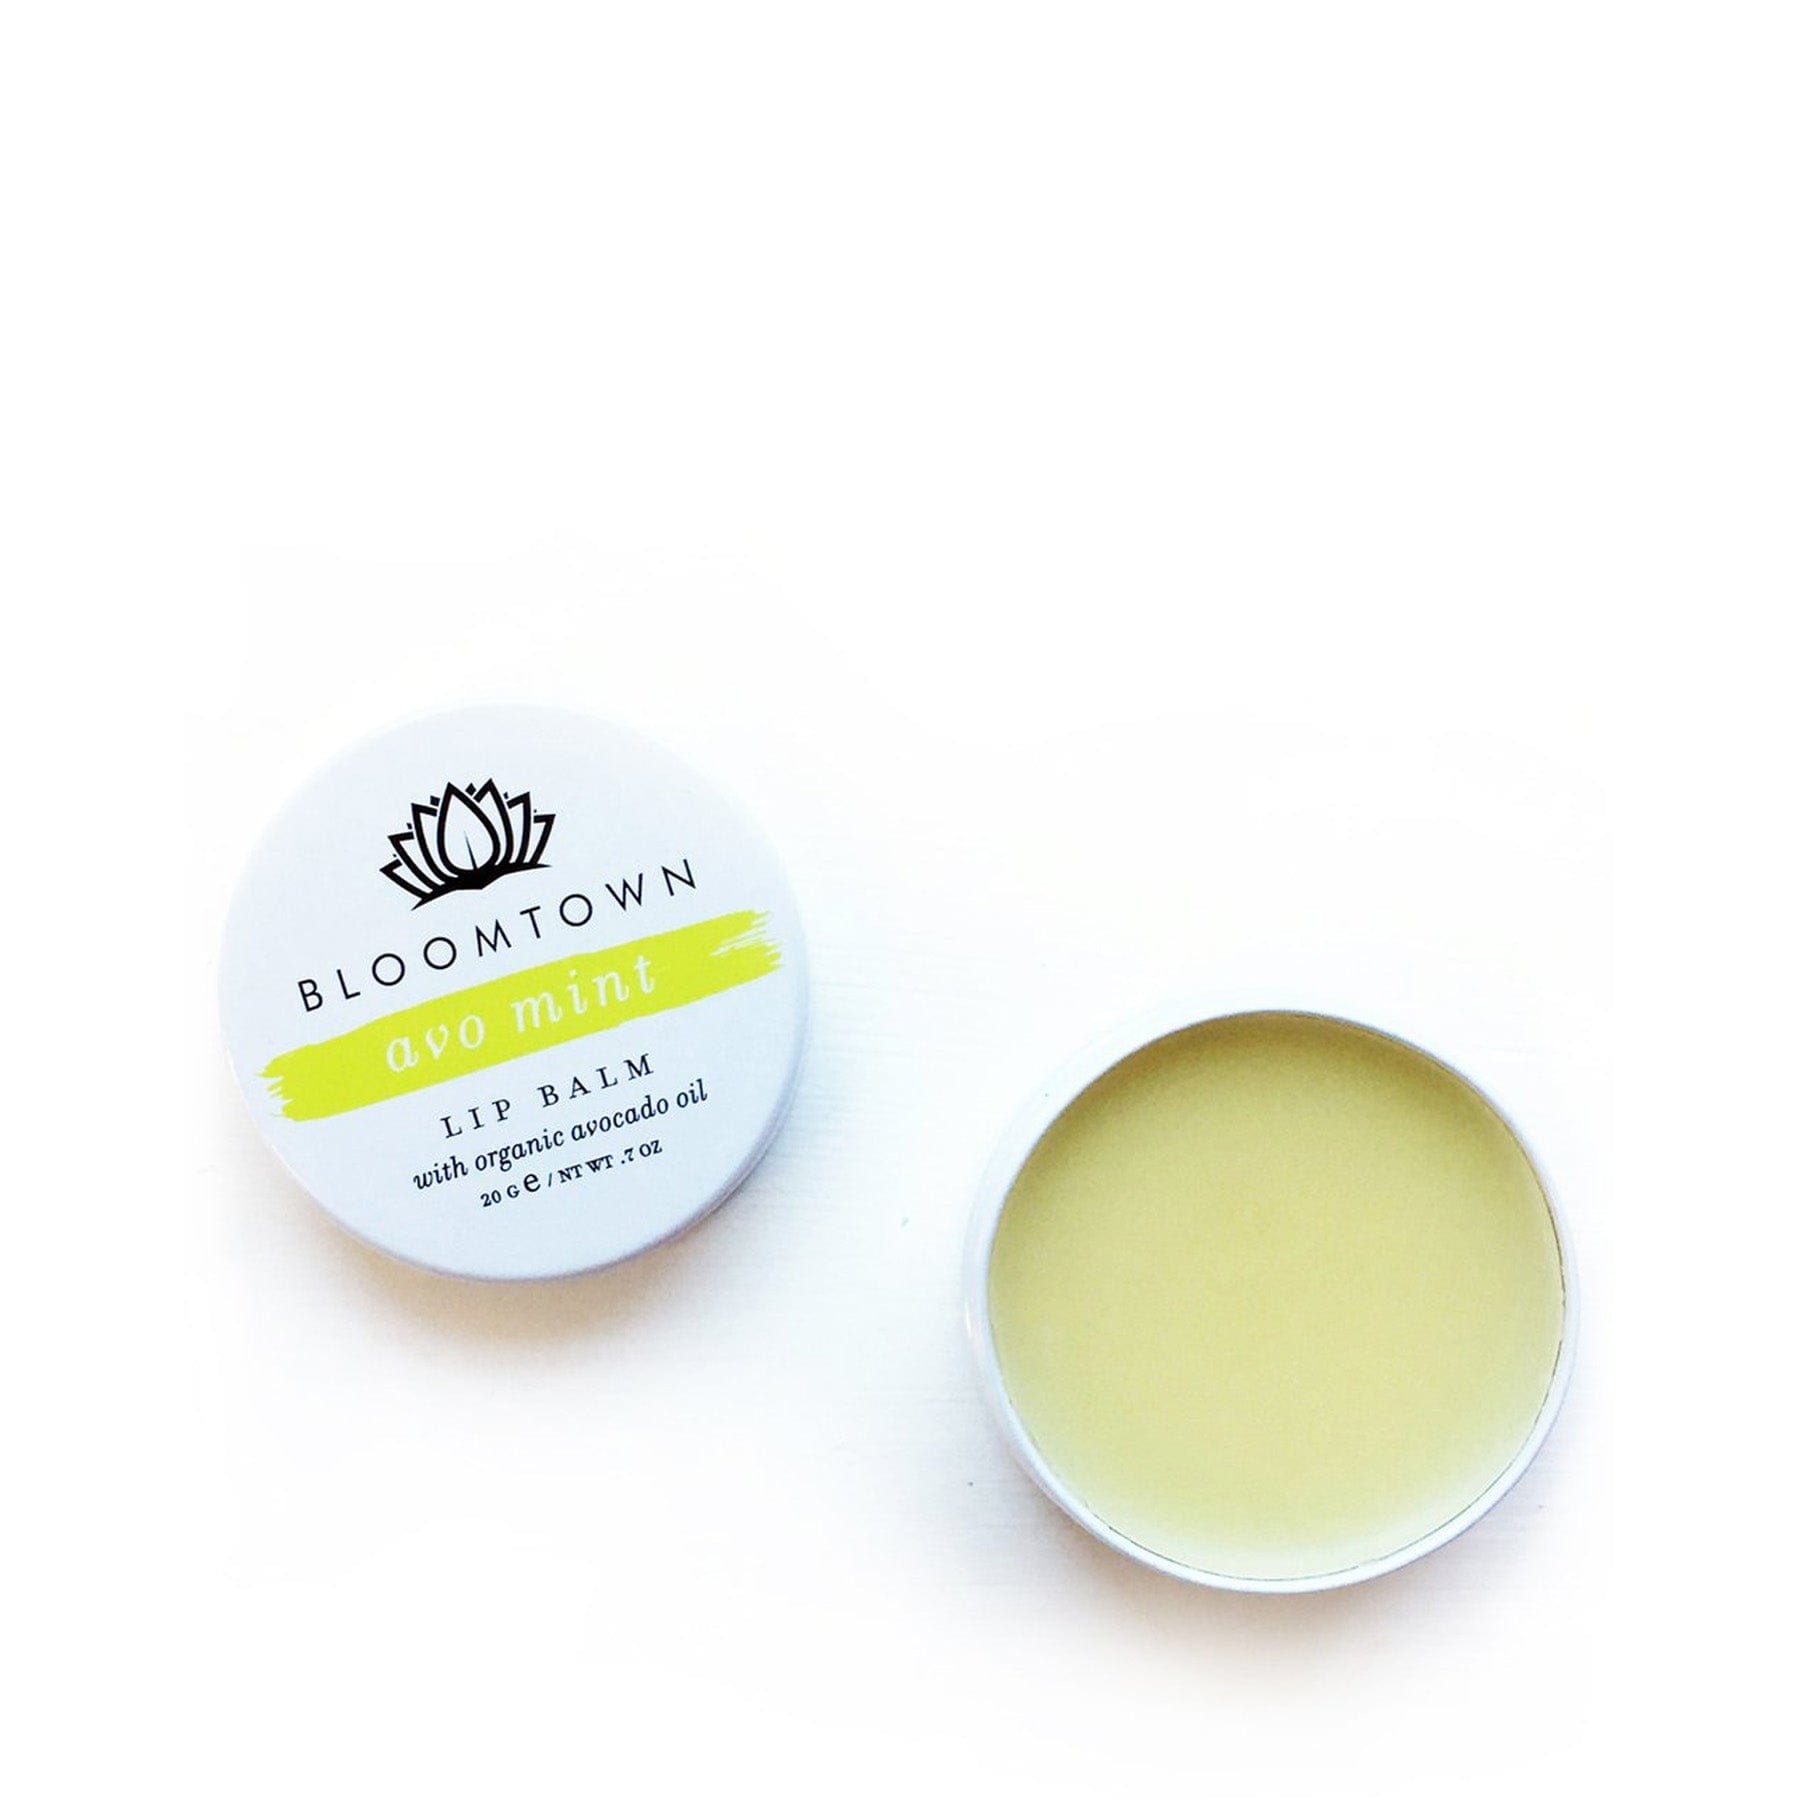 Organic Bloomtown Avo Mint lip balm with avocado oil, open tin showing product, white background, natural skincare, vegan lip care